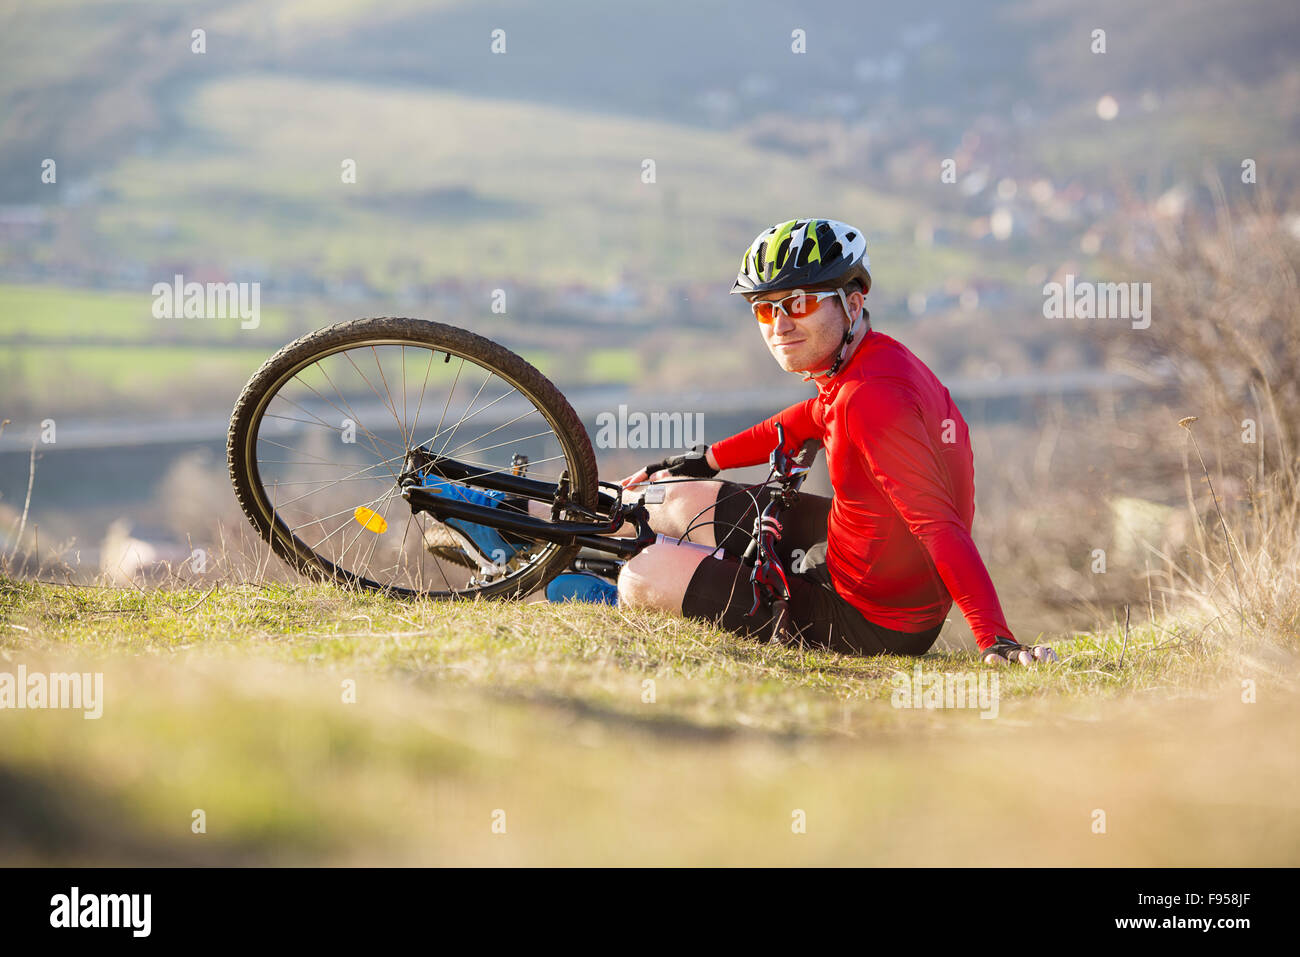 Young man injured during riding a bike Stock Photo